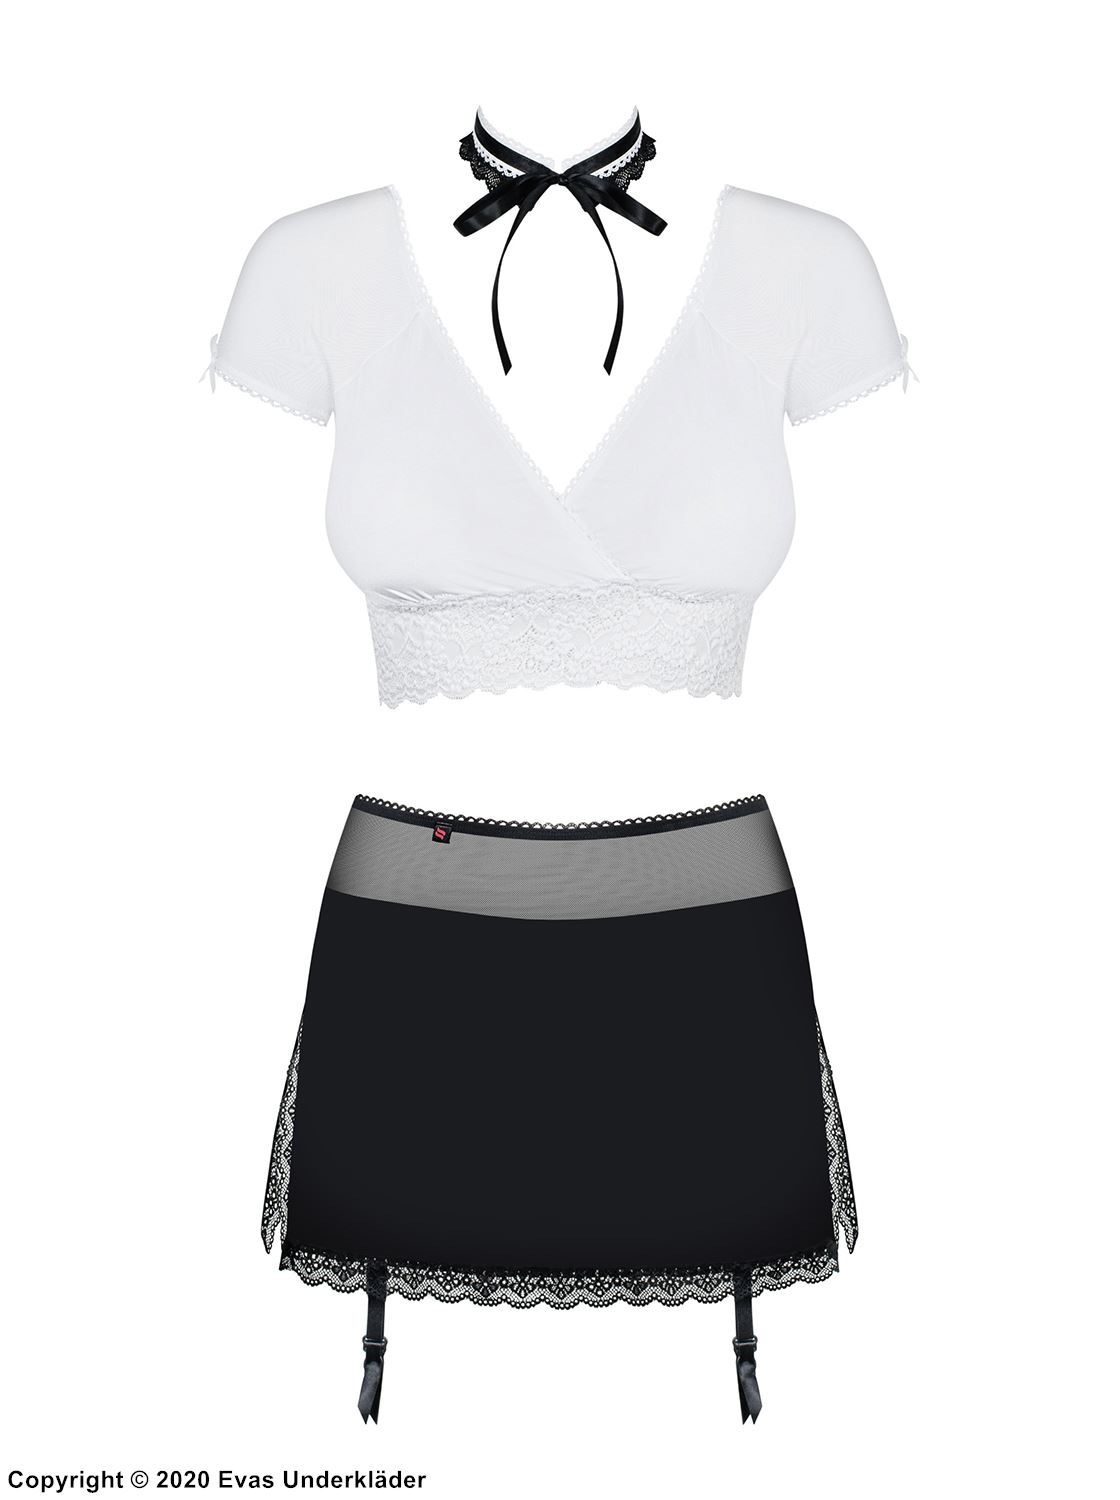 Secretary, top and skirt costume, lace trim